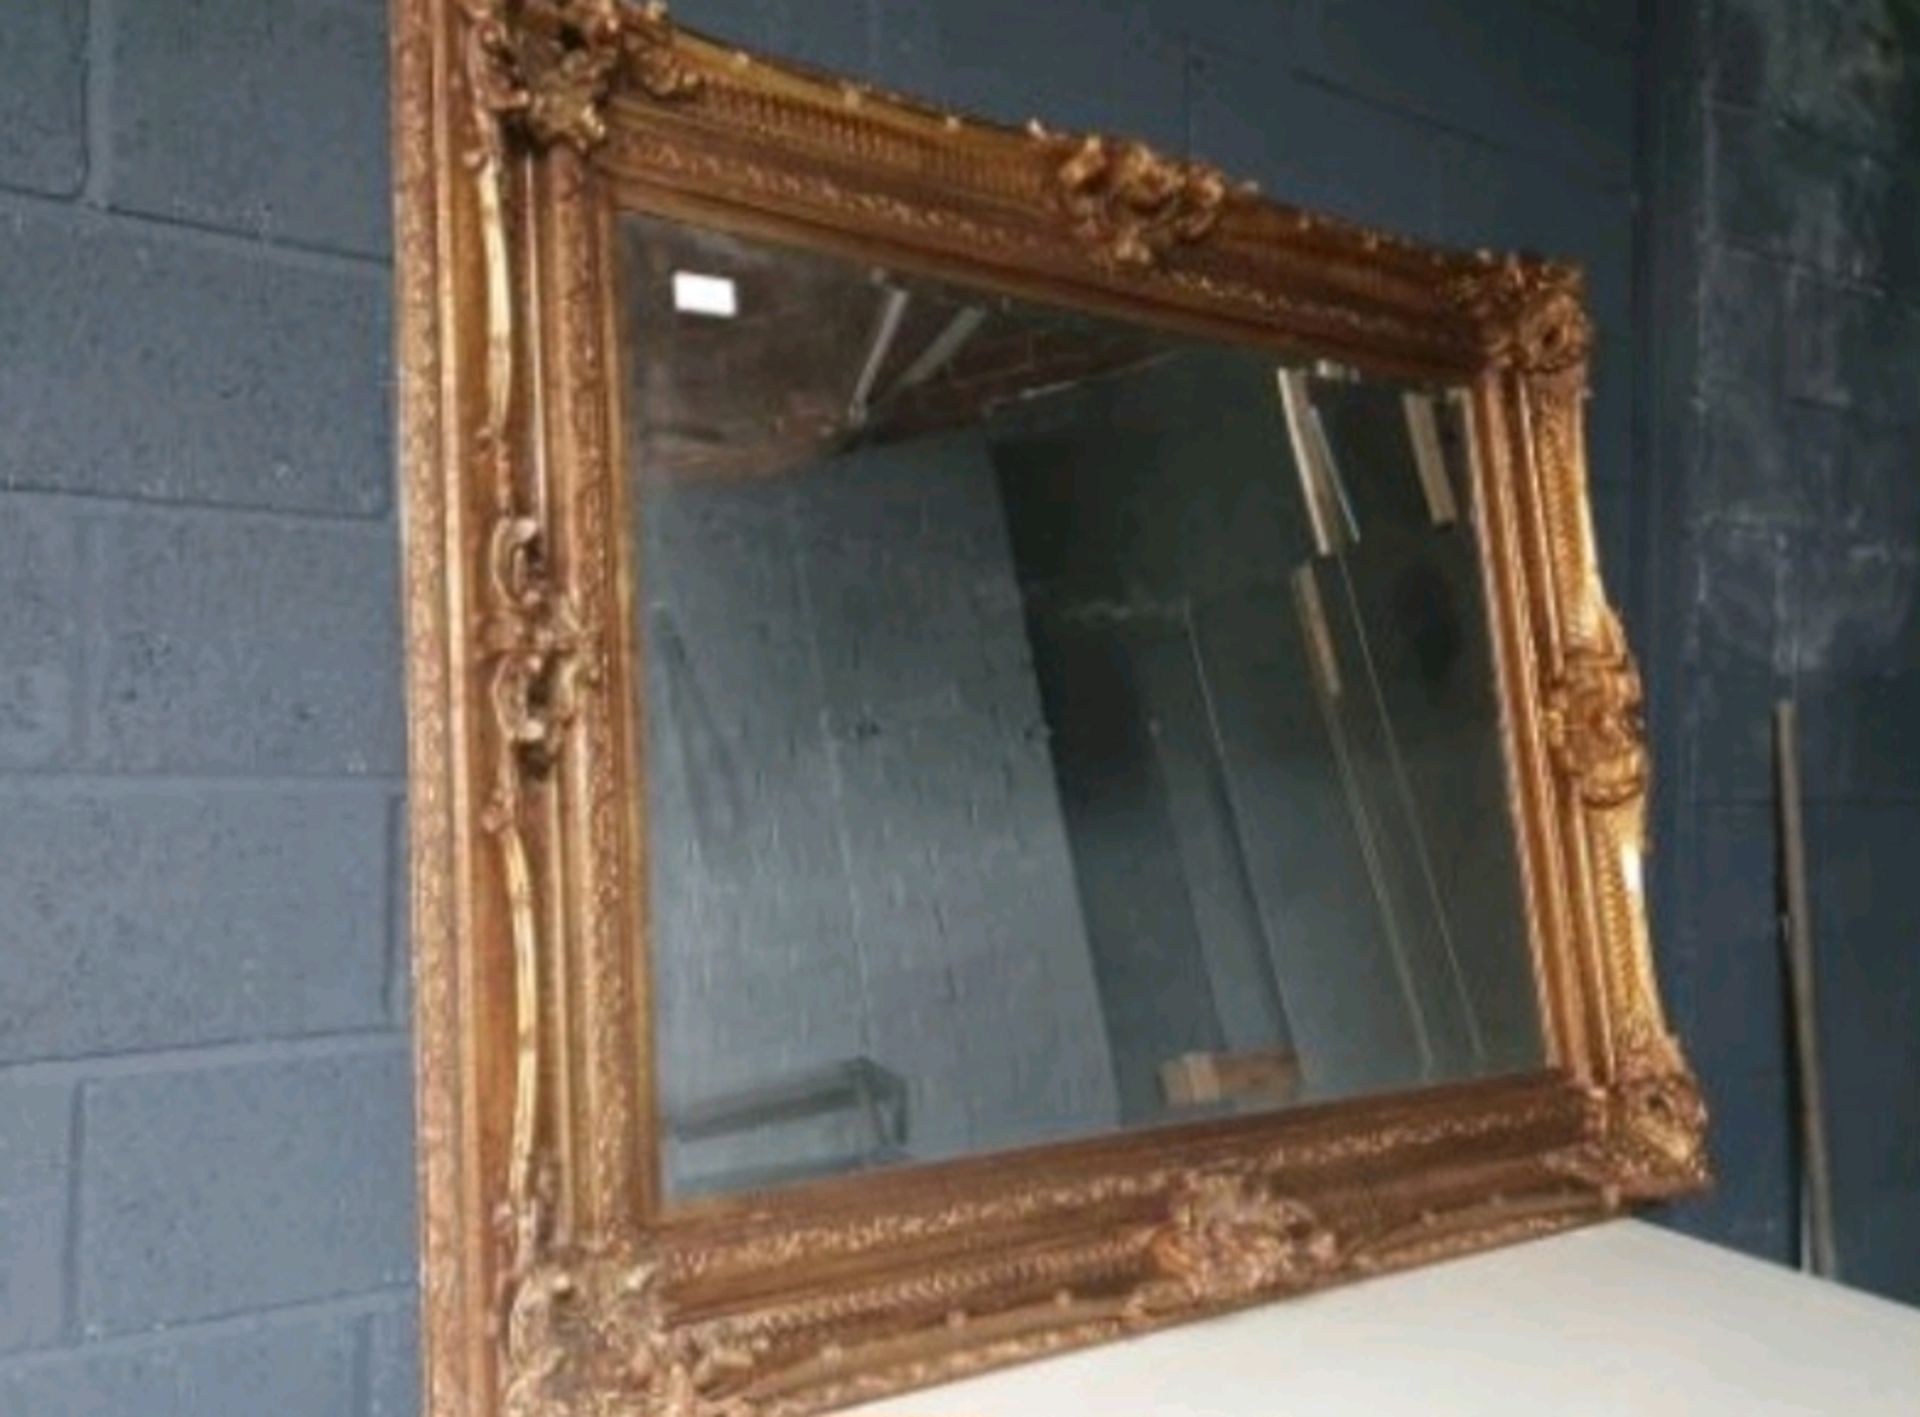 Large Ornate Wall Mirror